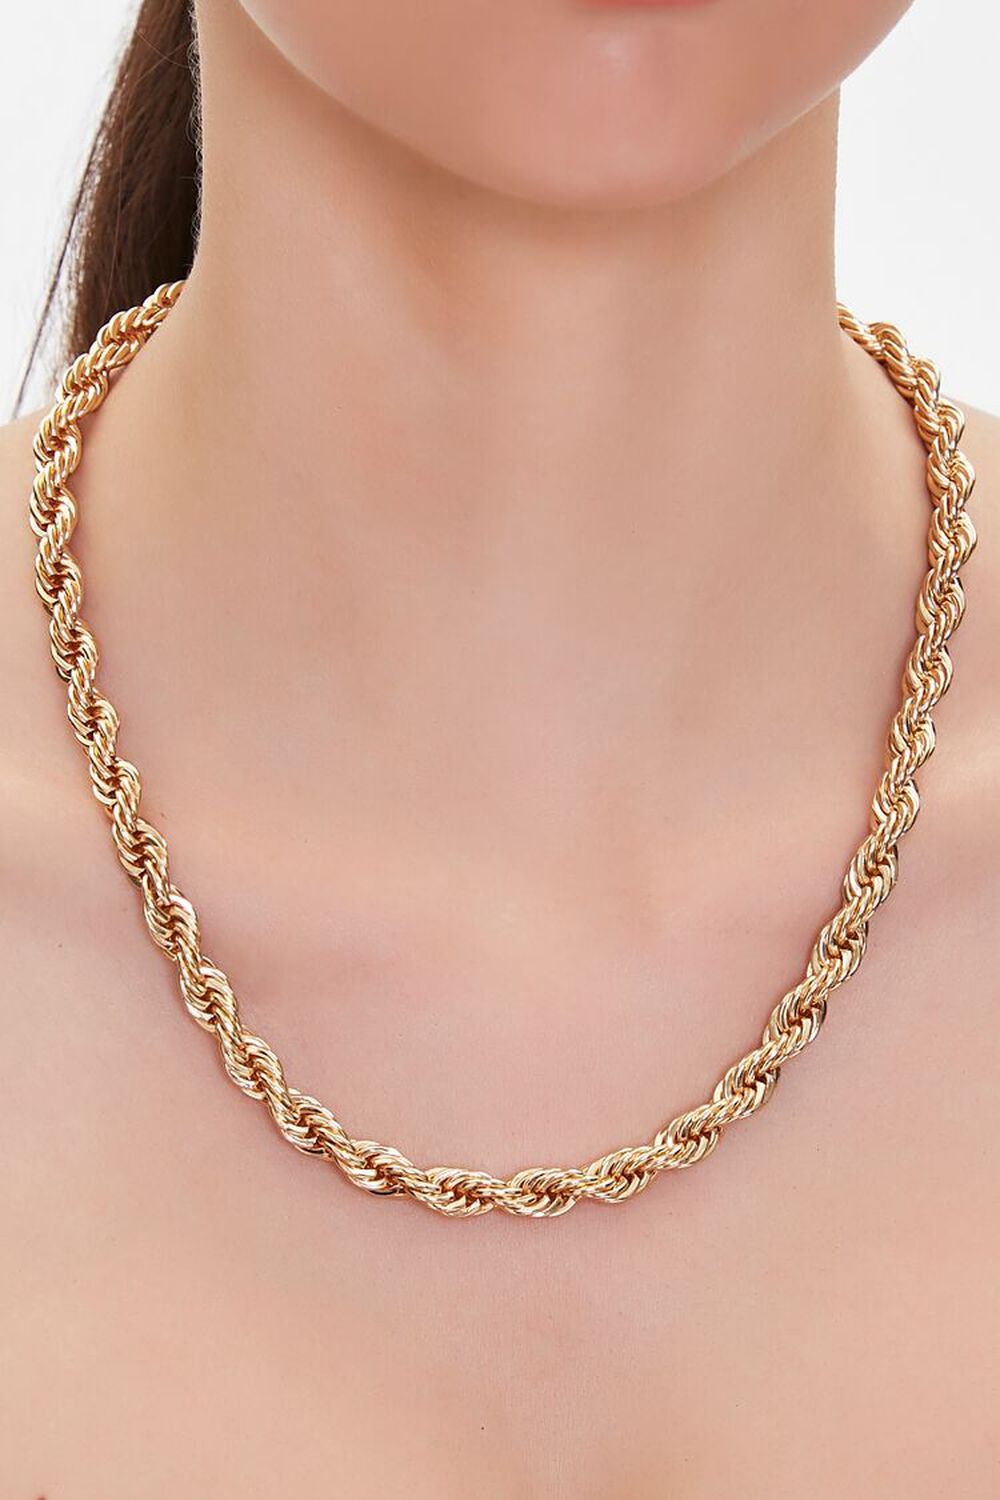 GOLD Twisted Chain Necklace, image 1